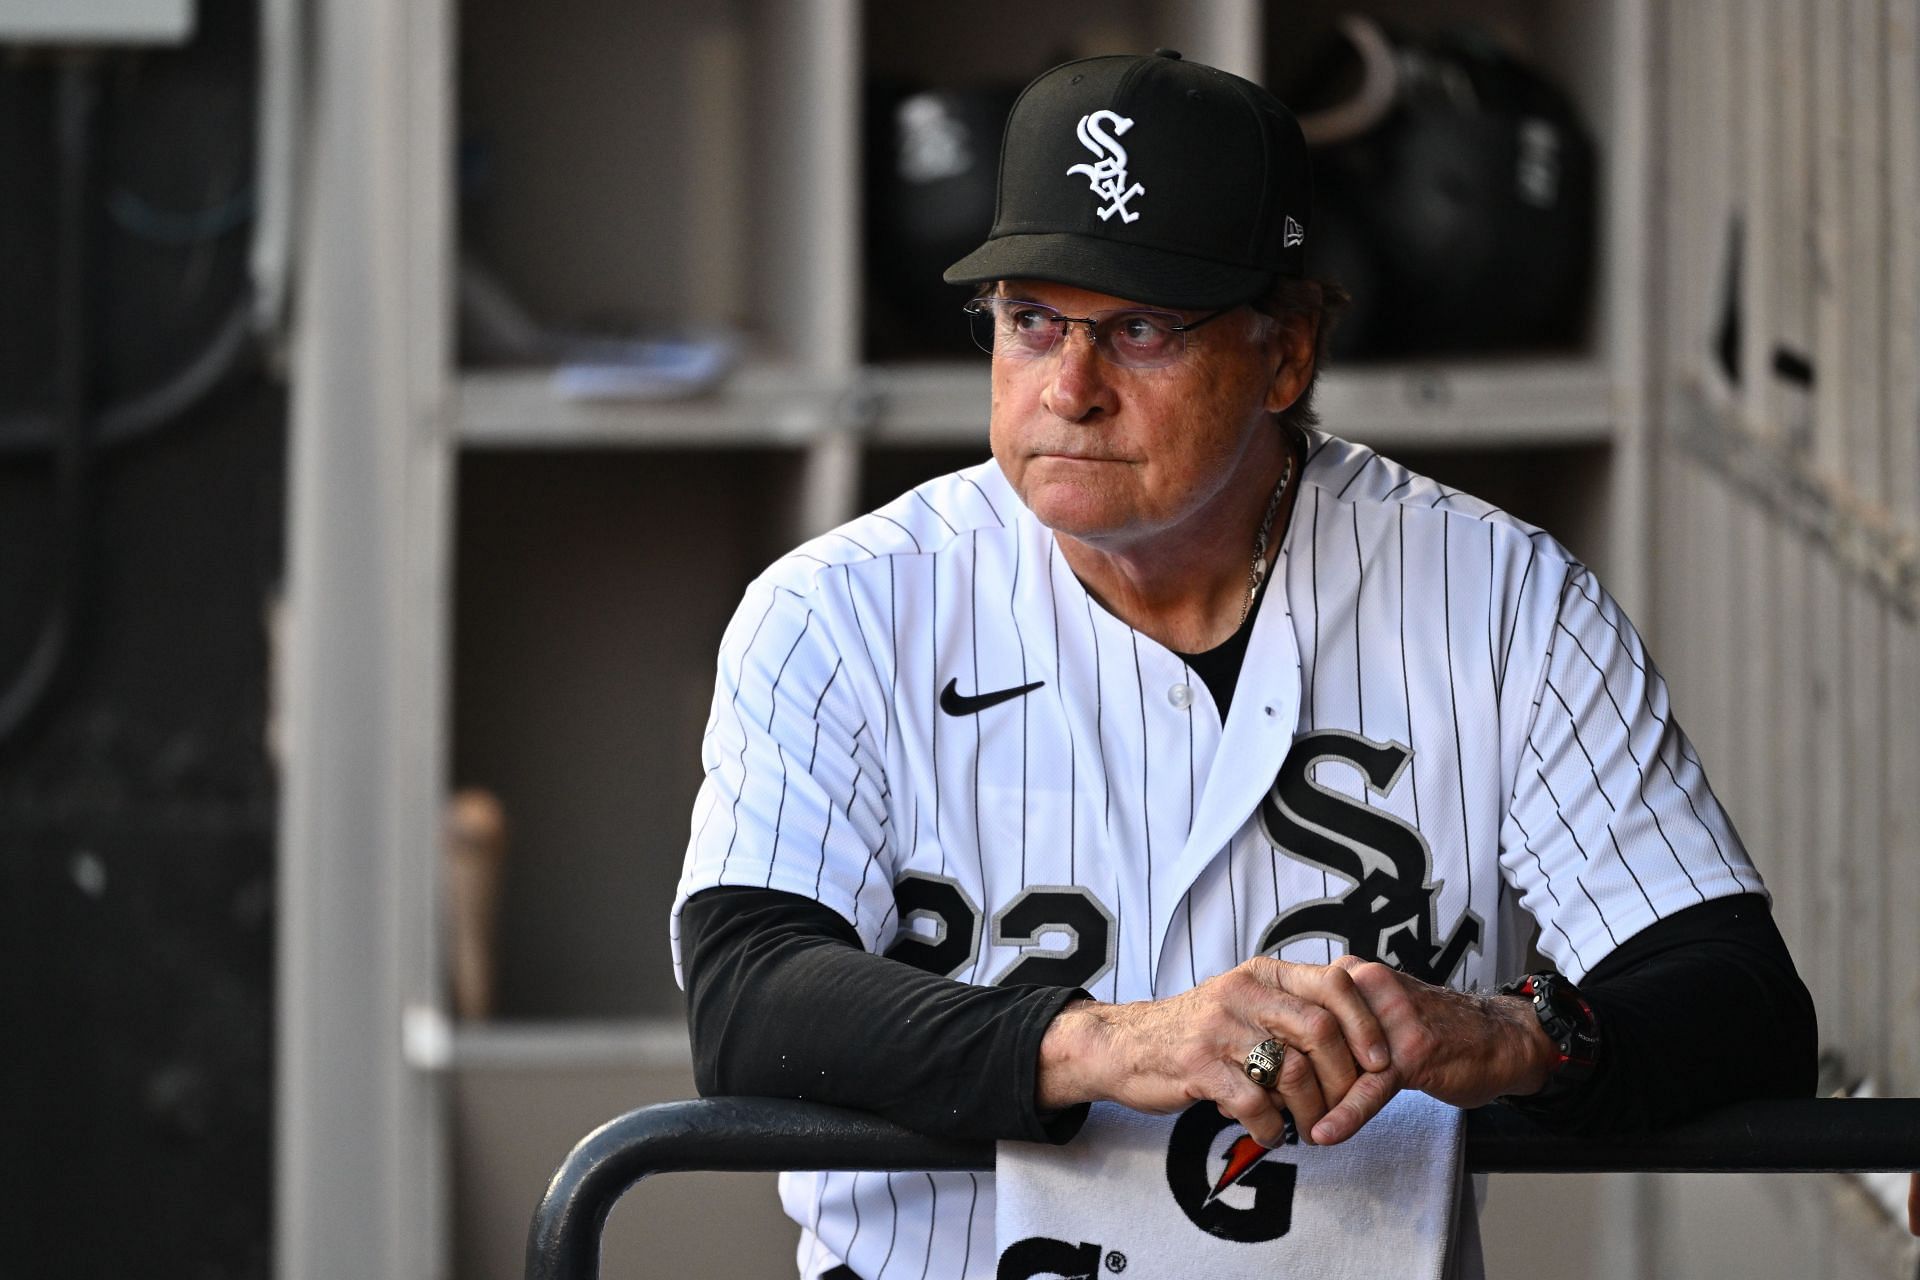 White Sox manager Tony La Russa ripped by MLB players, fans: 'TLR